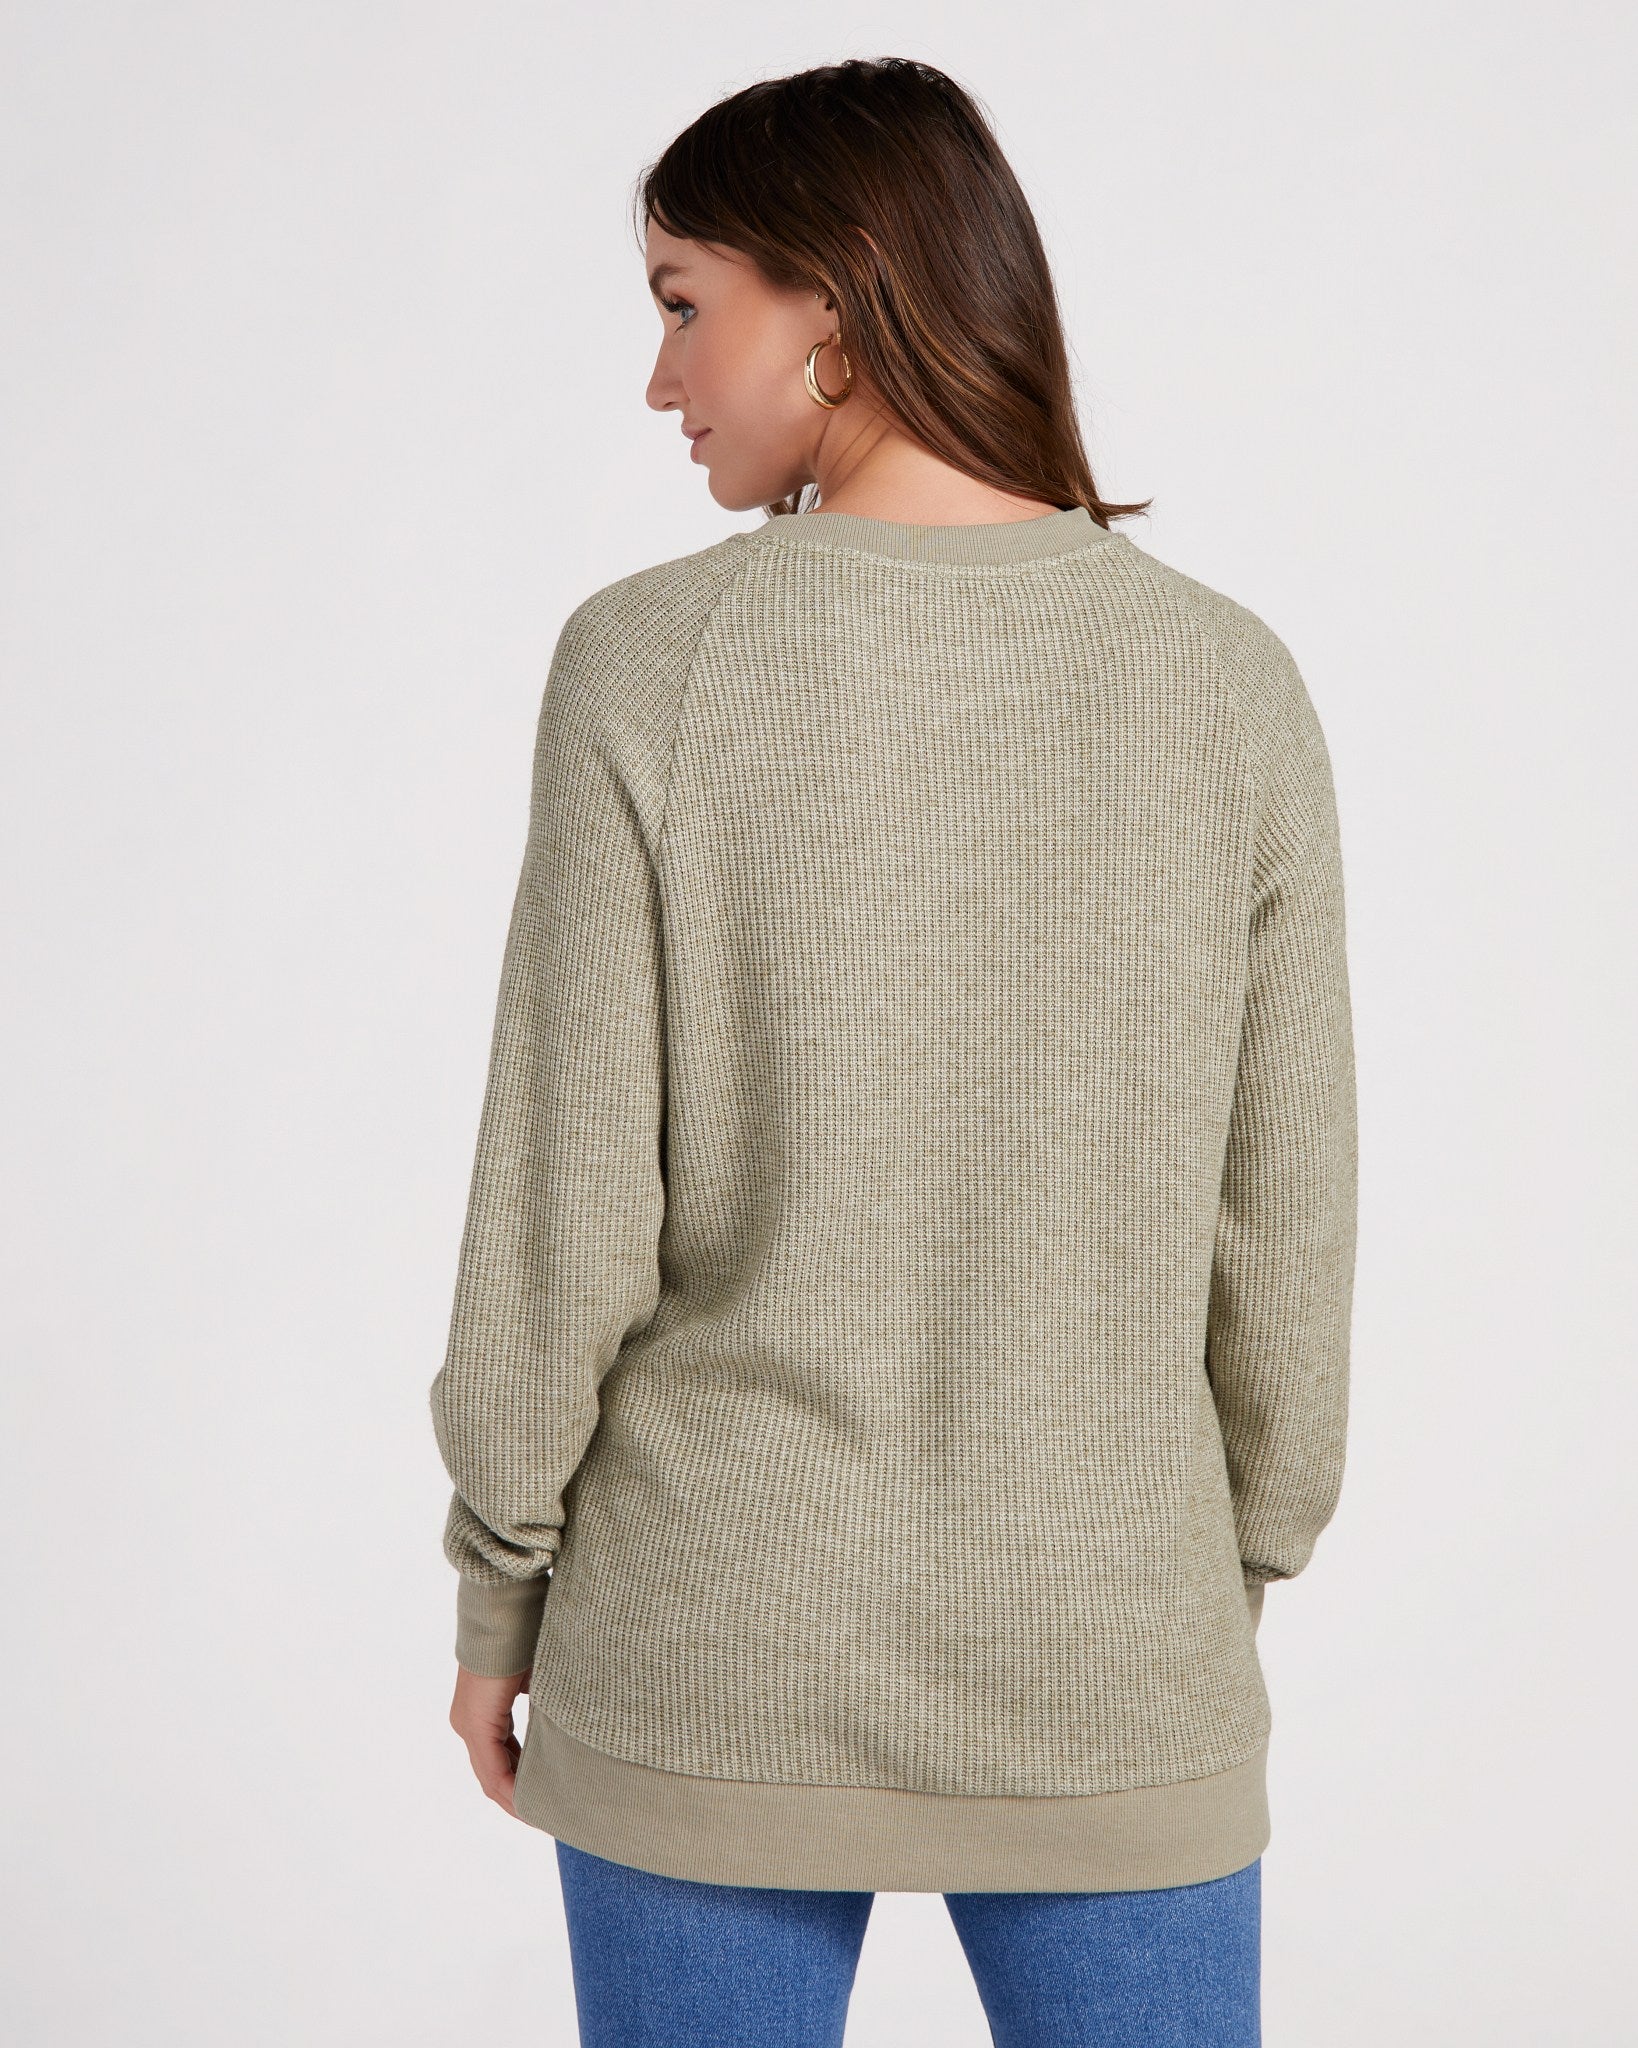 Z Supply Driftwood Thermal Long Sleeve Top – Social Threads